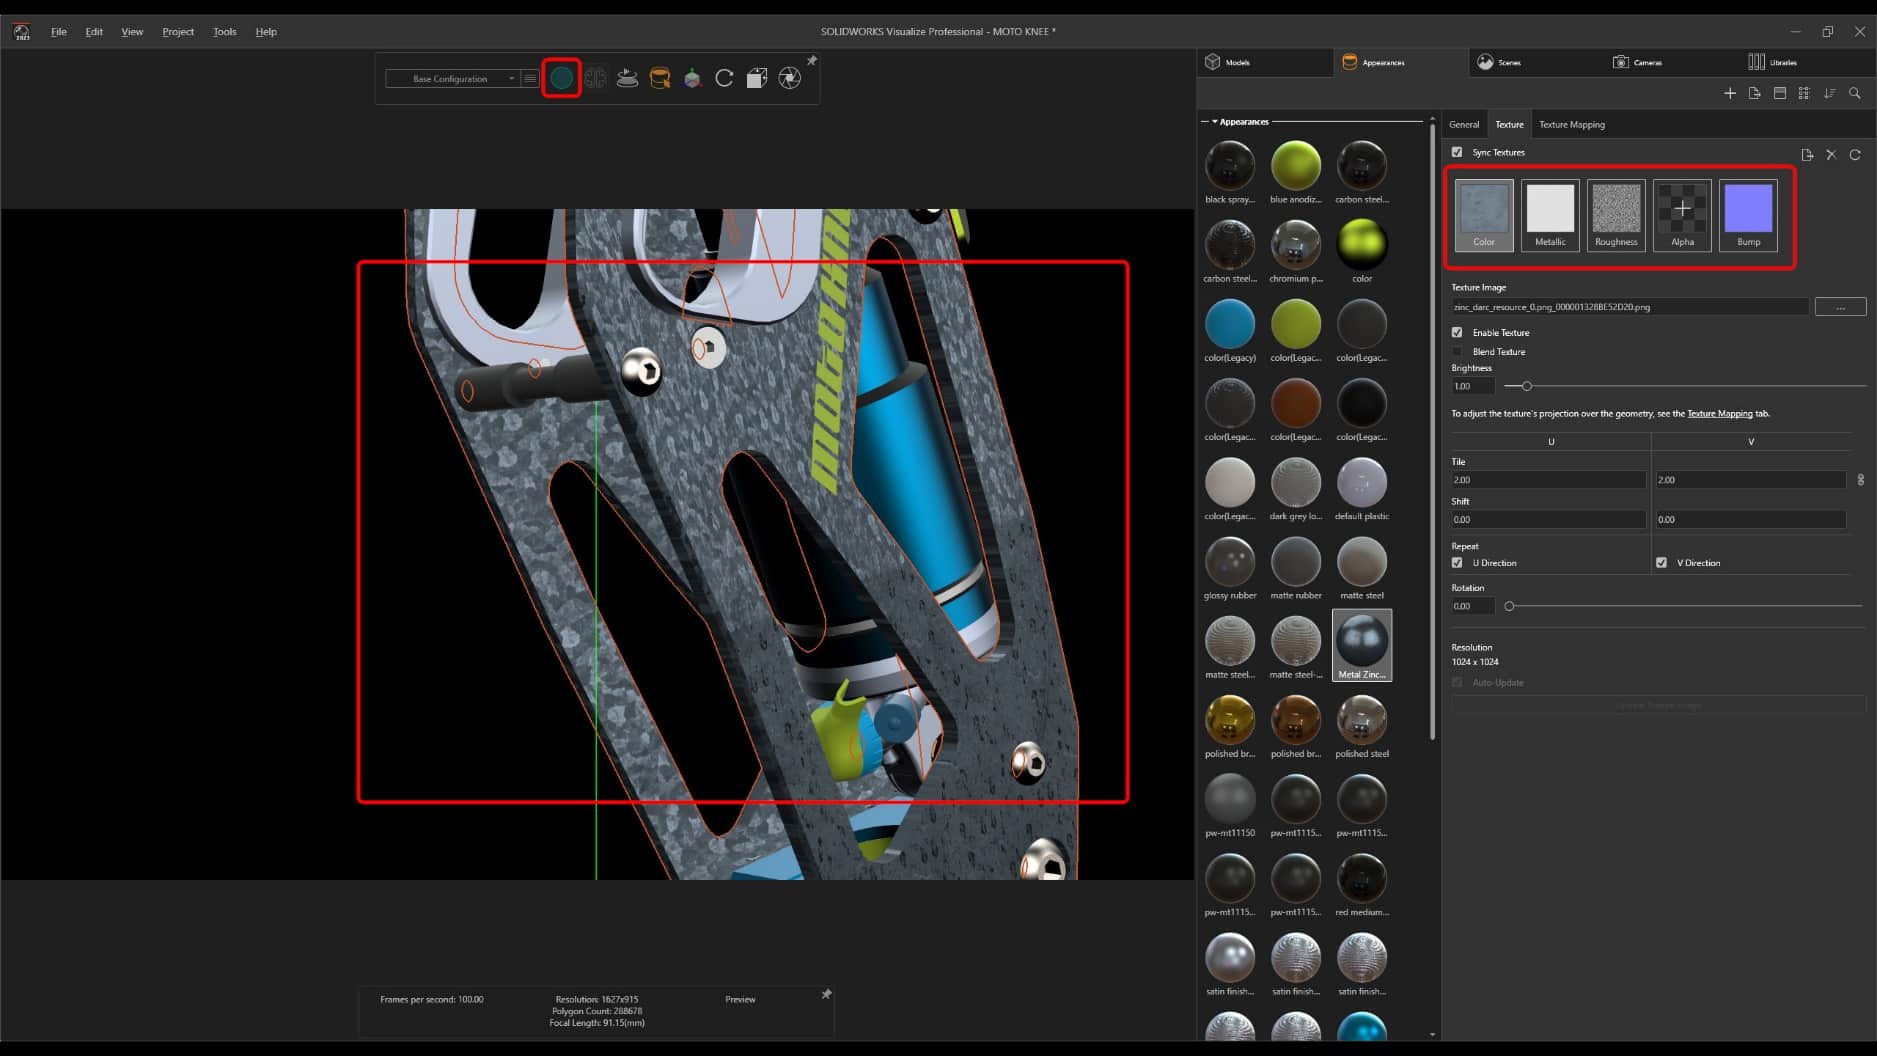 SOLIDWORKS Visualize 2023 now shows correct textures and reflections in the preview renderings.